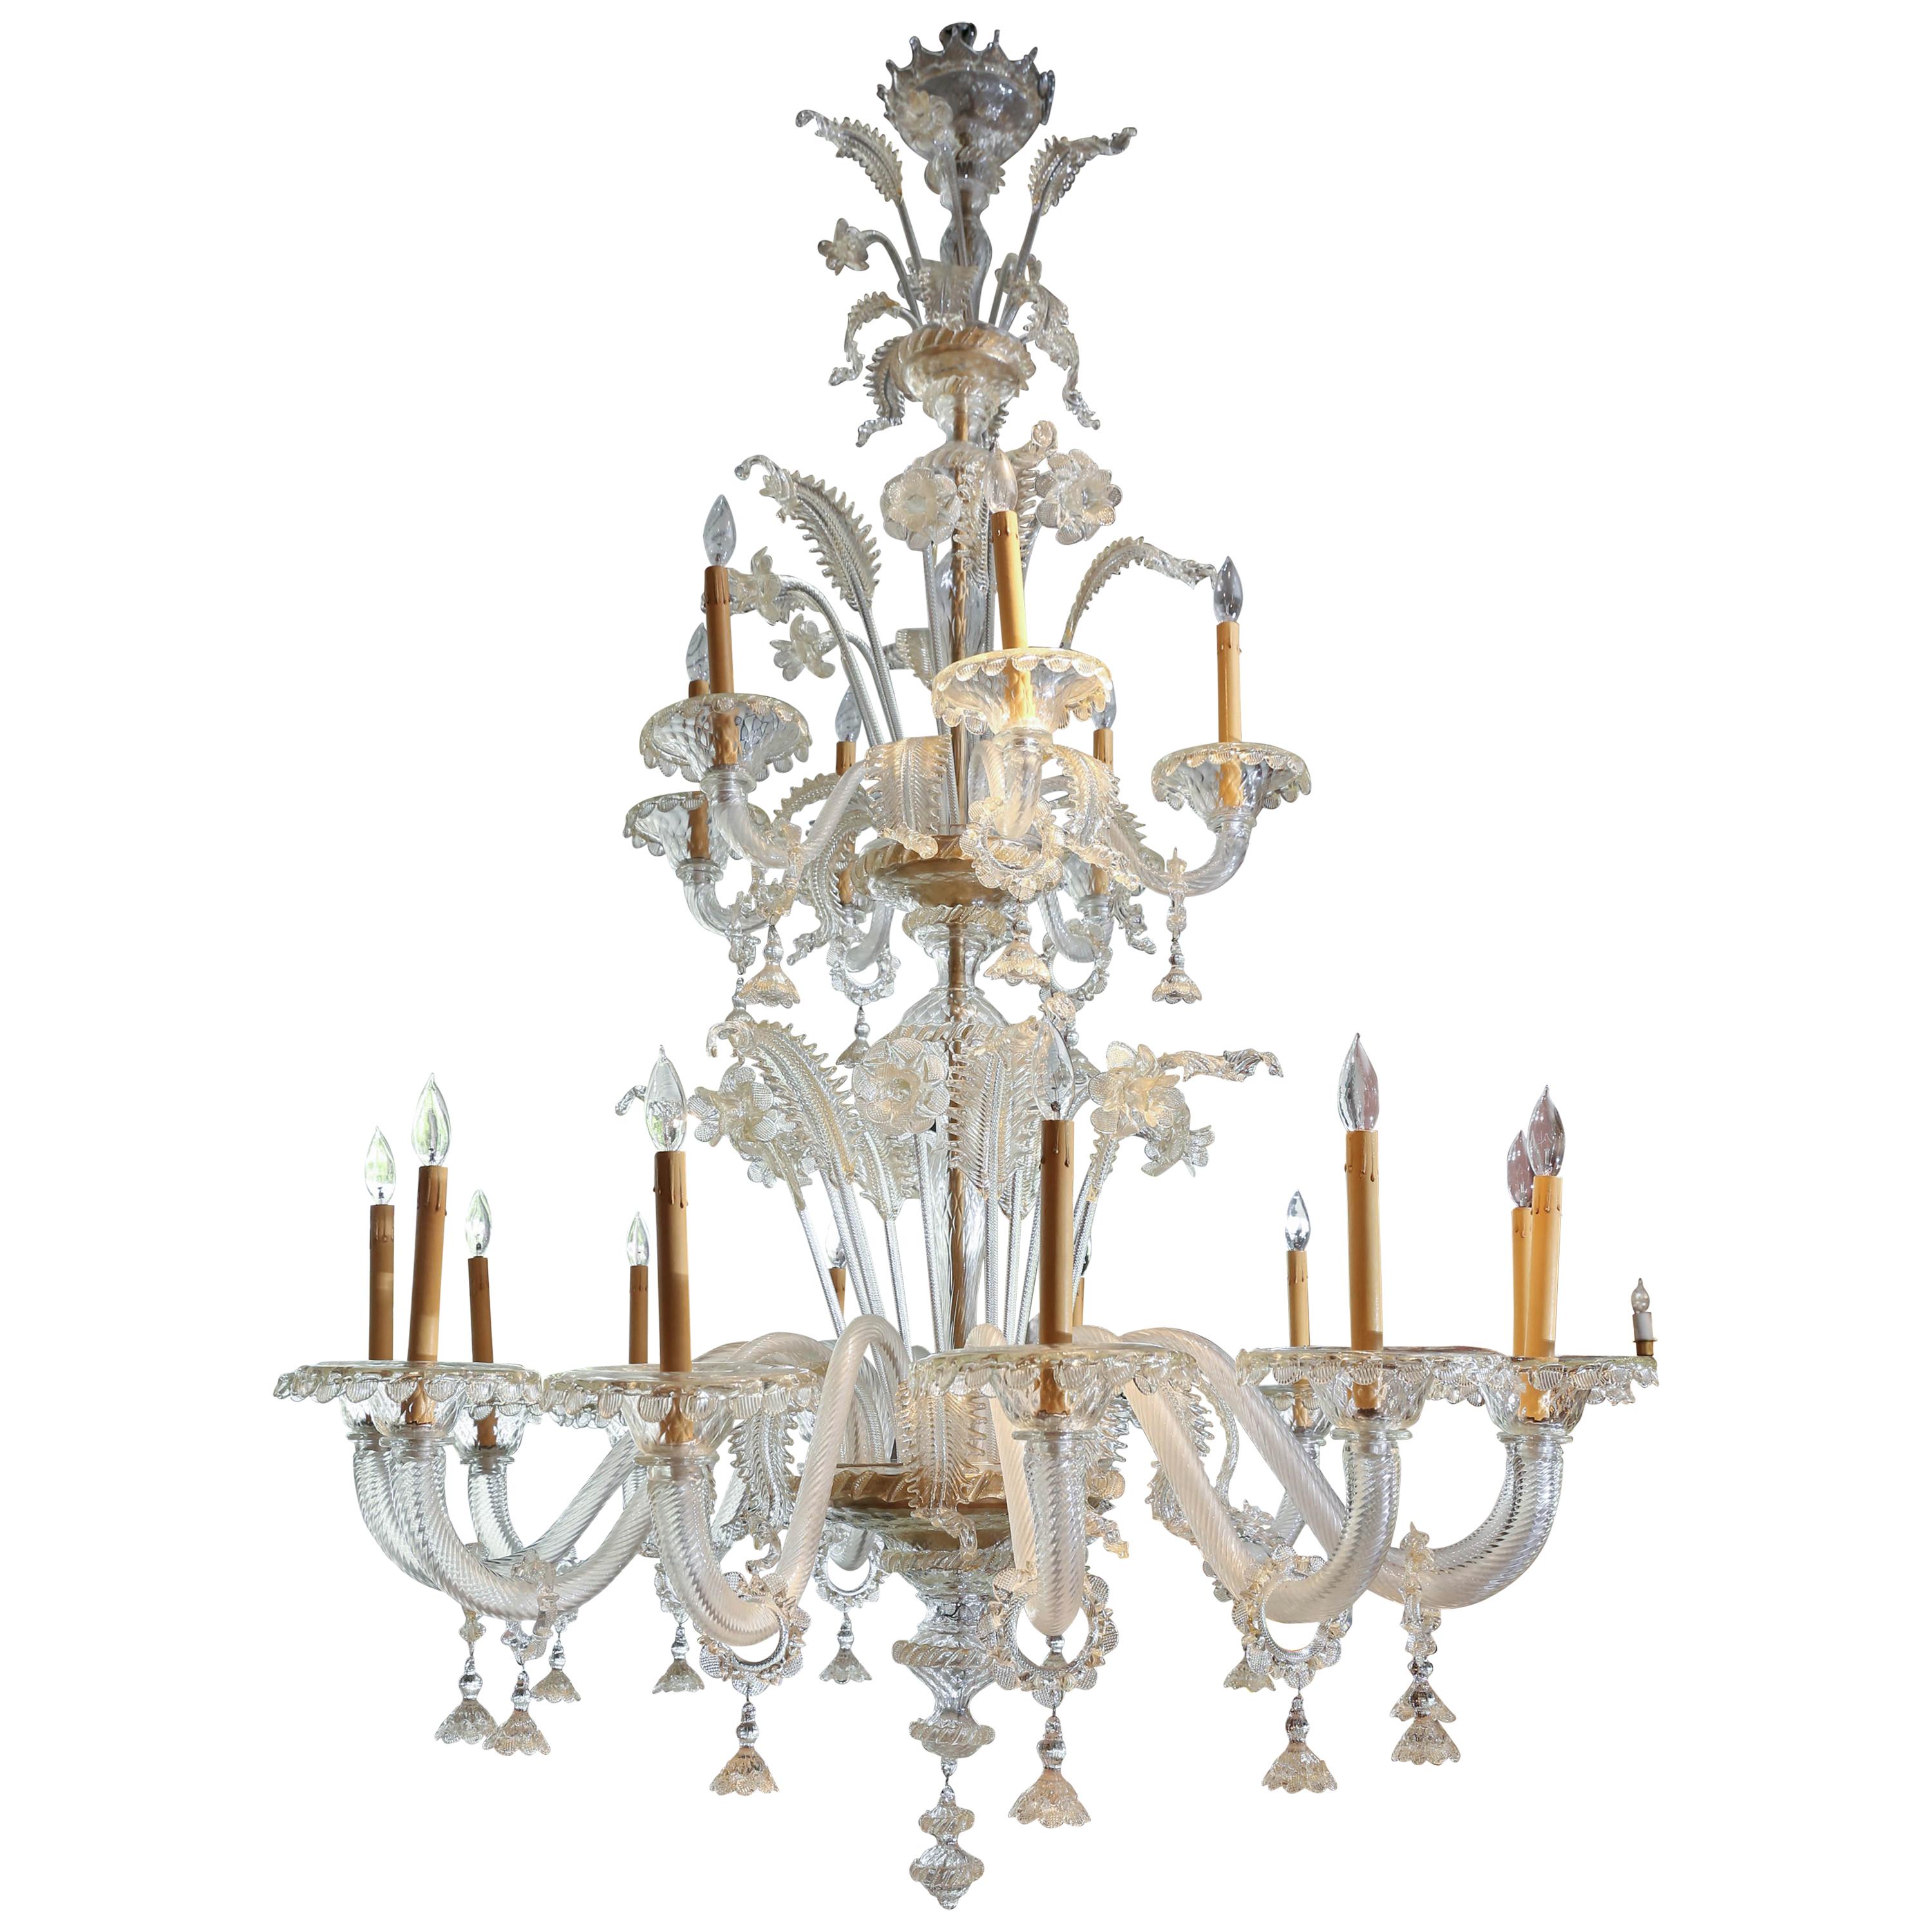 Monumental Venetian Glass Chandelier with 18 Lights on Two Tiers in Pale Gold